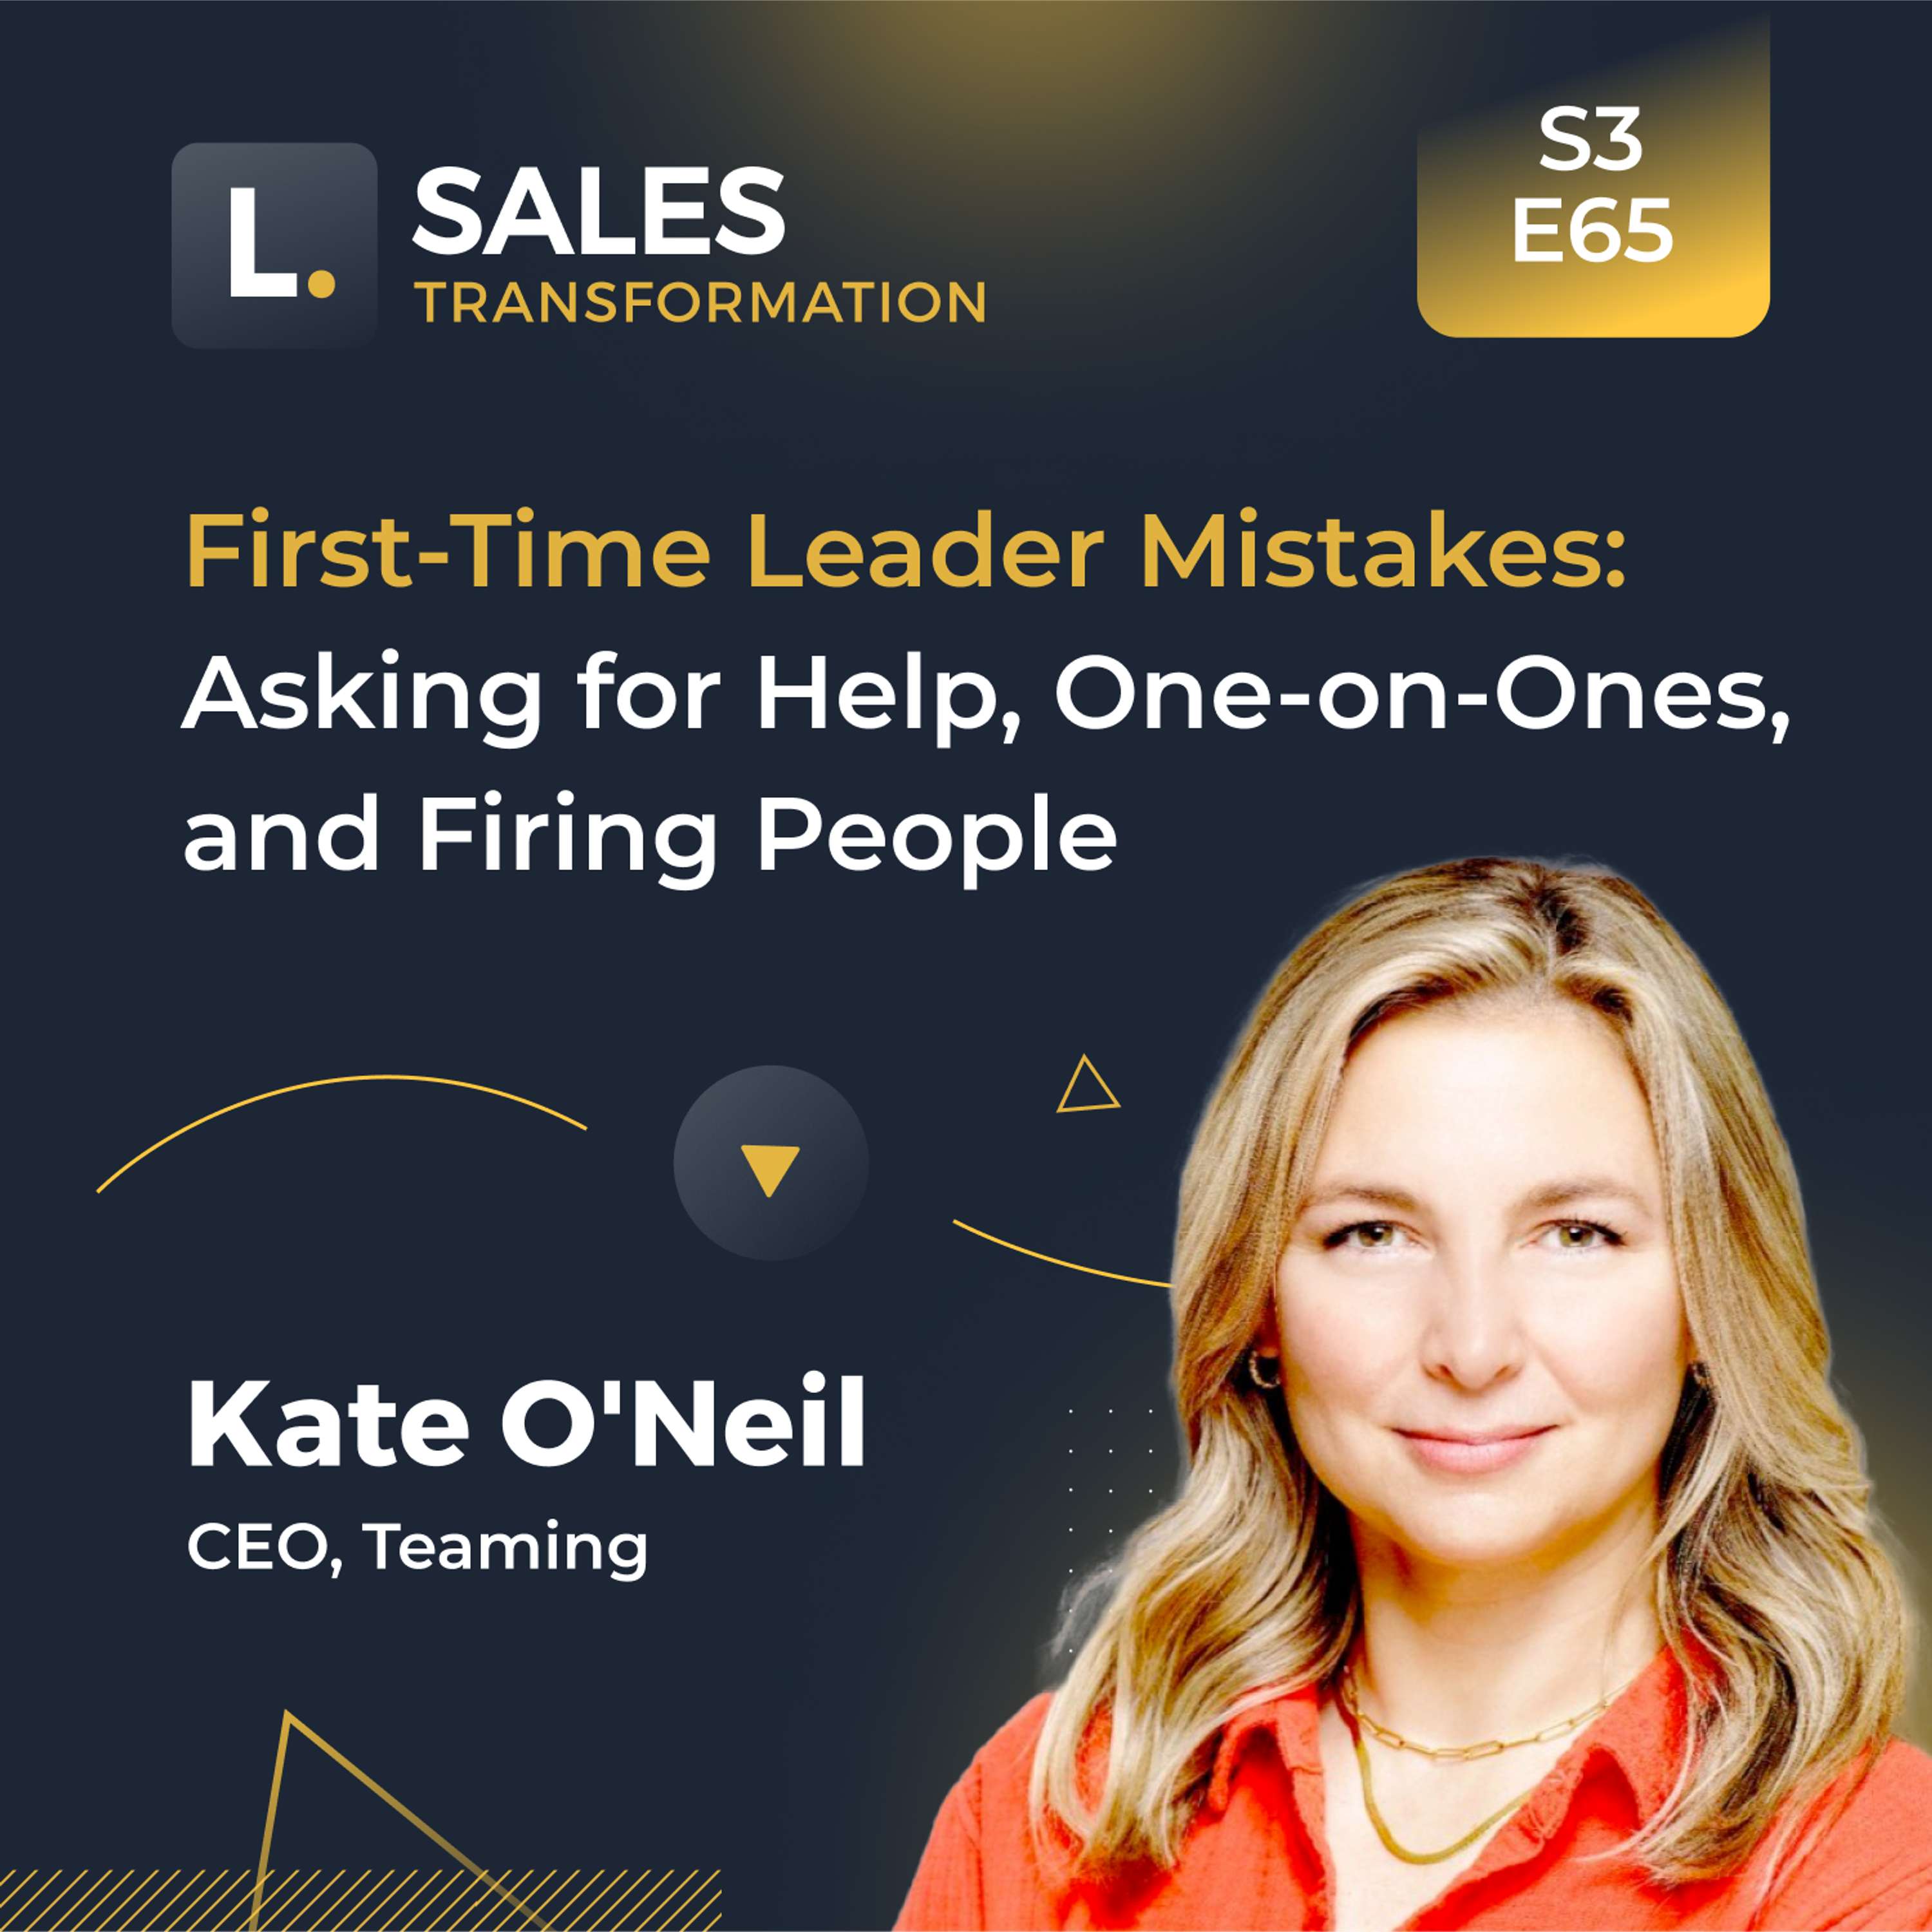 739- First-Time Leader Mistakes: Asking for Help, One-on-Ones, and Firing People, with Kate O'Neil